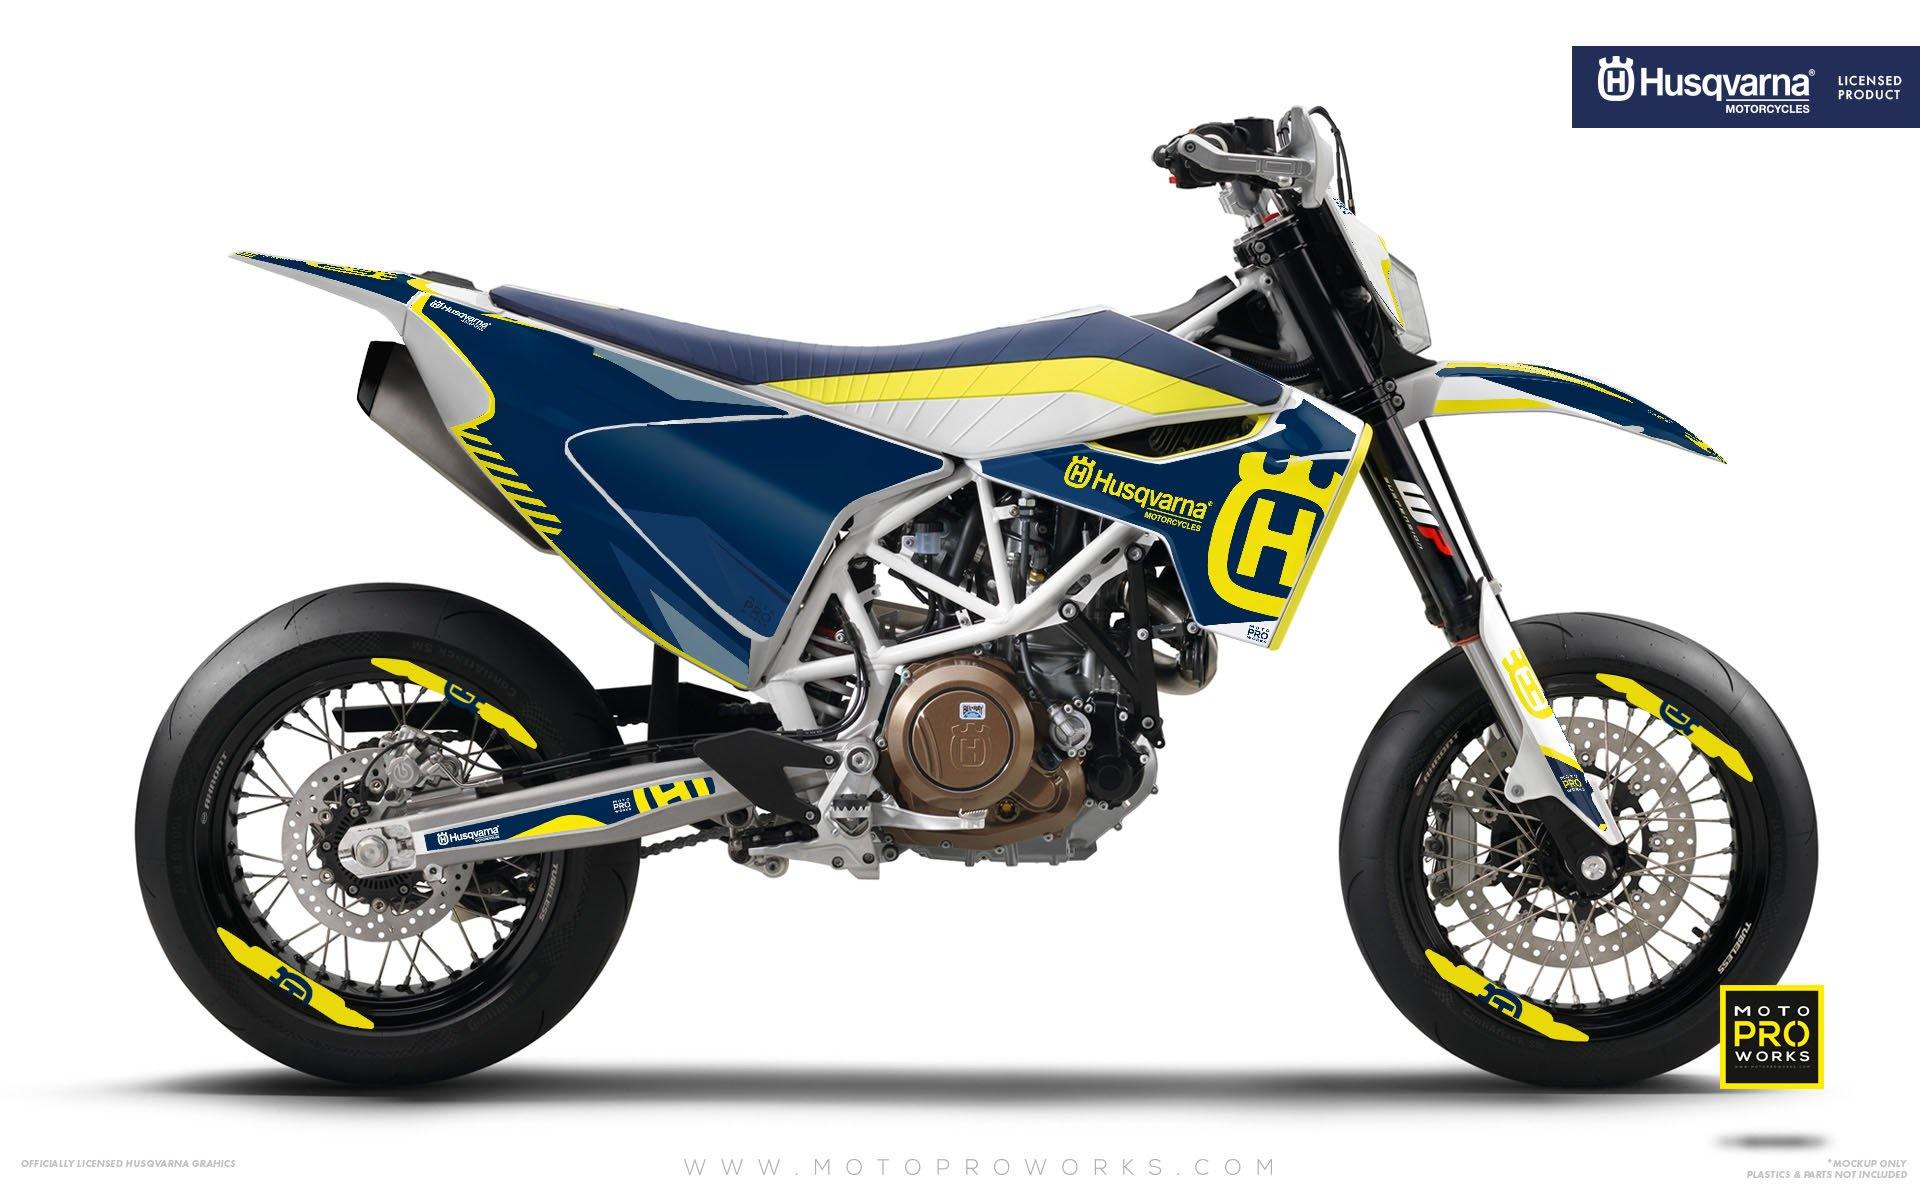 Husqvarna GRAPHIC KIT - "FACTOR" (Blue/yellow) - MotoProWorks | Decals and Bike Graphic kit